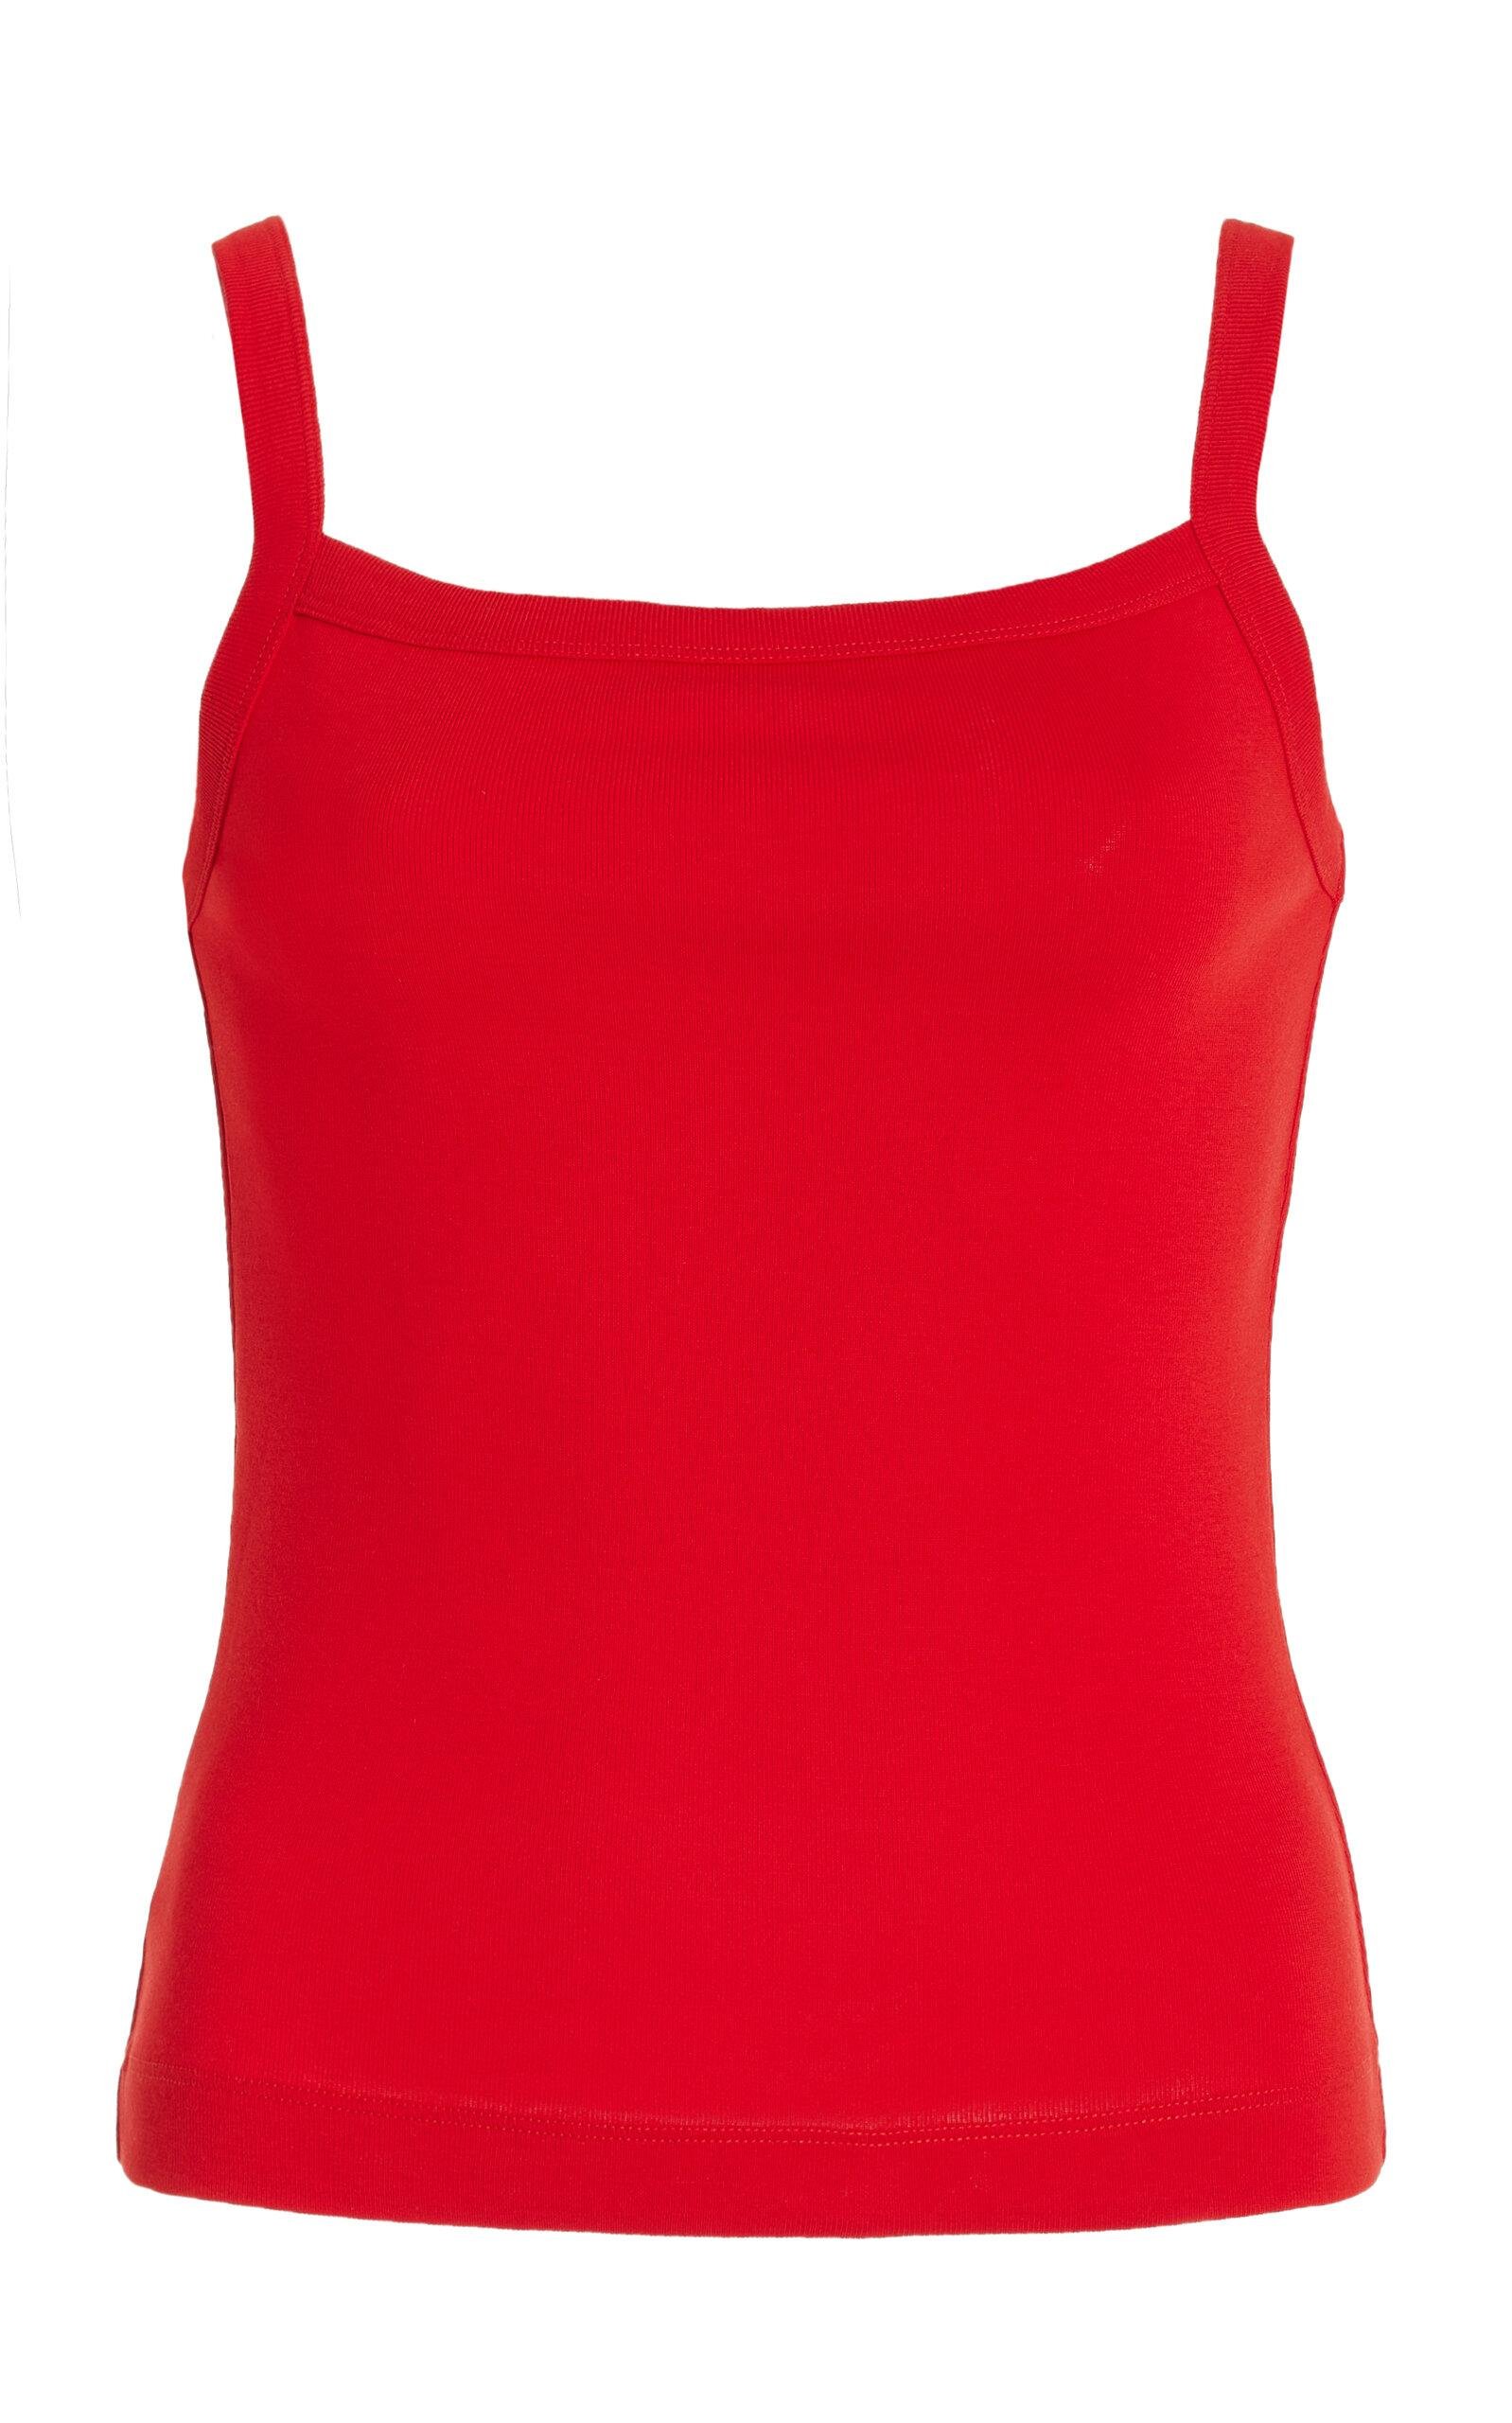 Flore Flore - May Organic Cotton Camisole Top - Red - M - Moda Operandi by FLORE FLORE